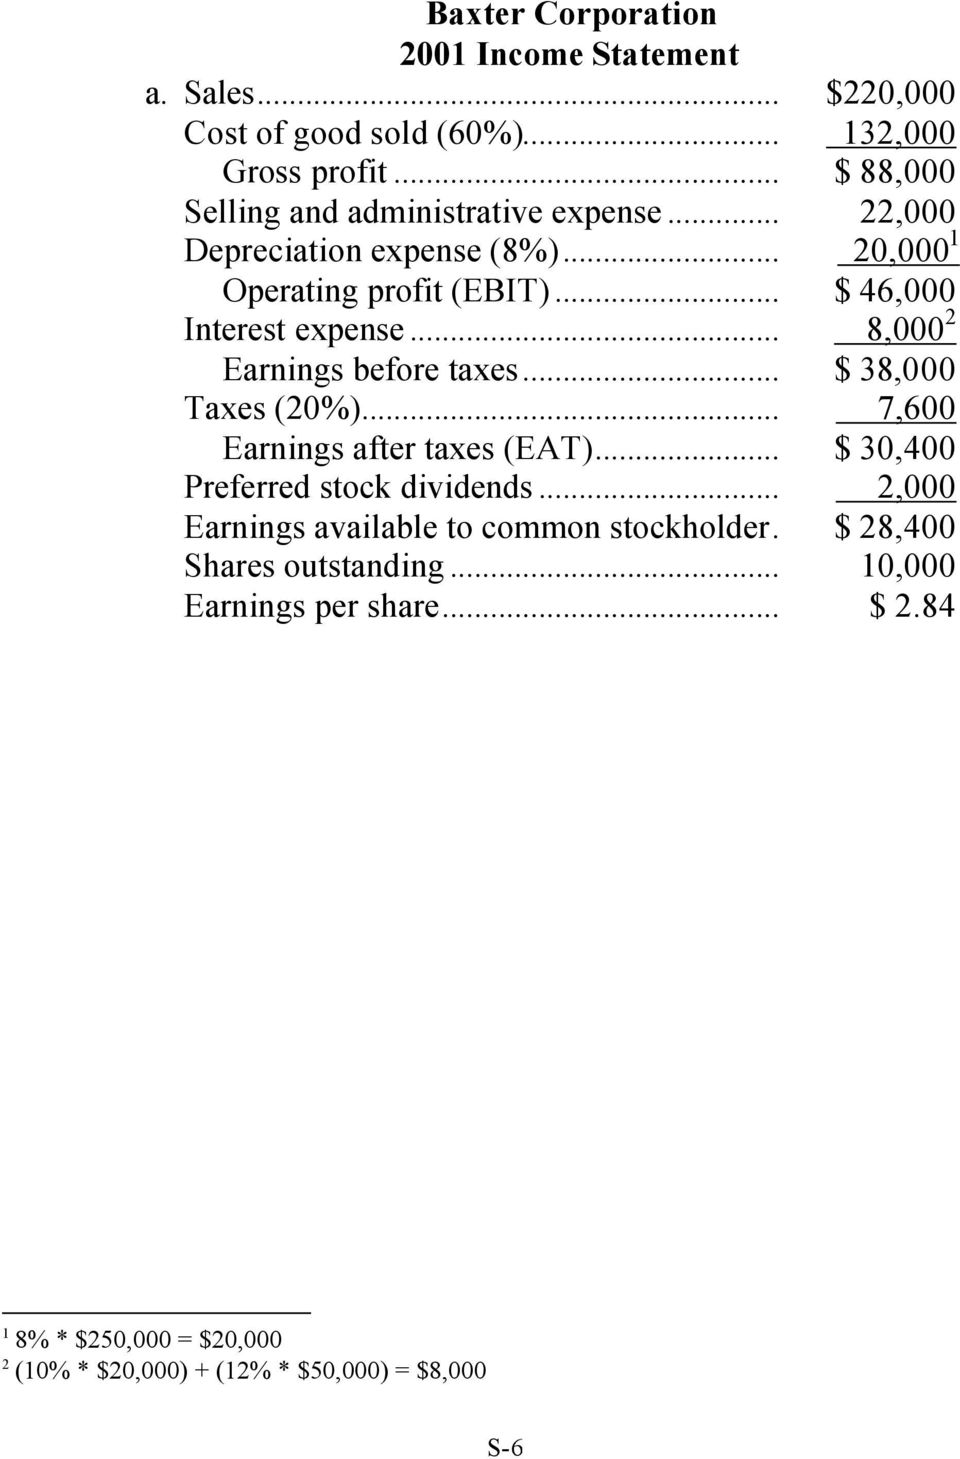 .. 8,000 2 Earnings before taxes... $ 38,000 Taxes (20%)... 7,600 Earnings after taxes (EAT)... $ 30,400 Preferred stock dividends.